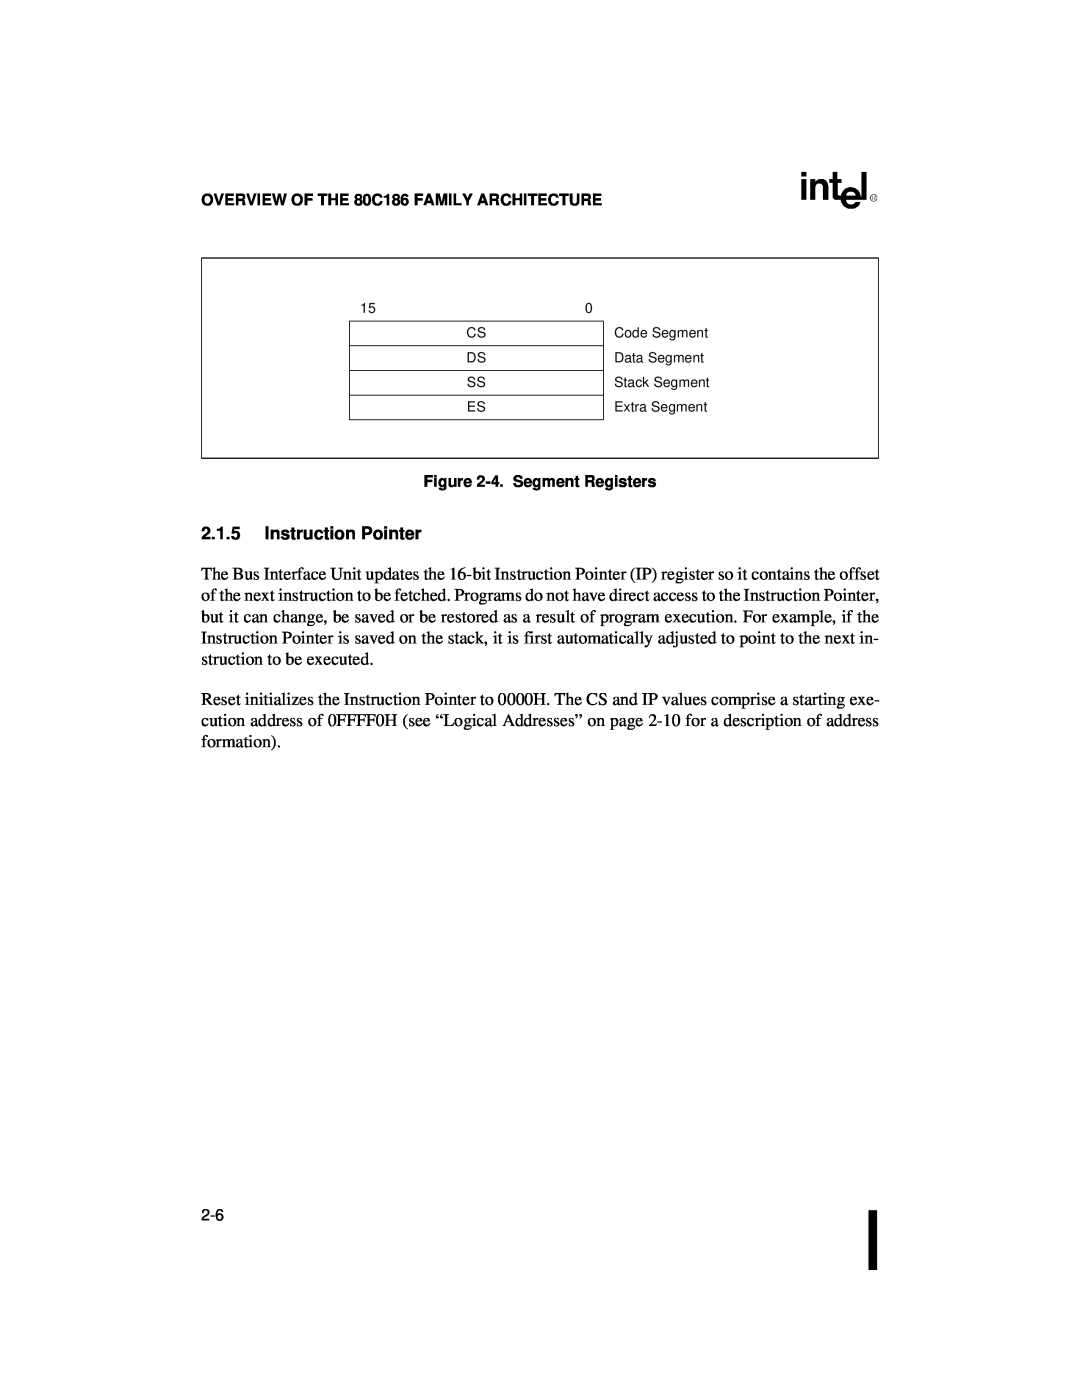 Intel 80C186XL, 80C188XL 2.1.5Instruction Pointer, OVERVIEW OF THE 80C186 FAMILY ARCHITECTURE, 4.Segment Registers 